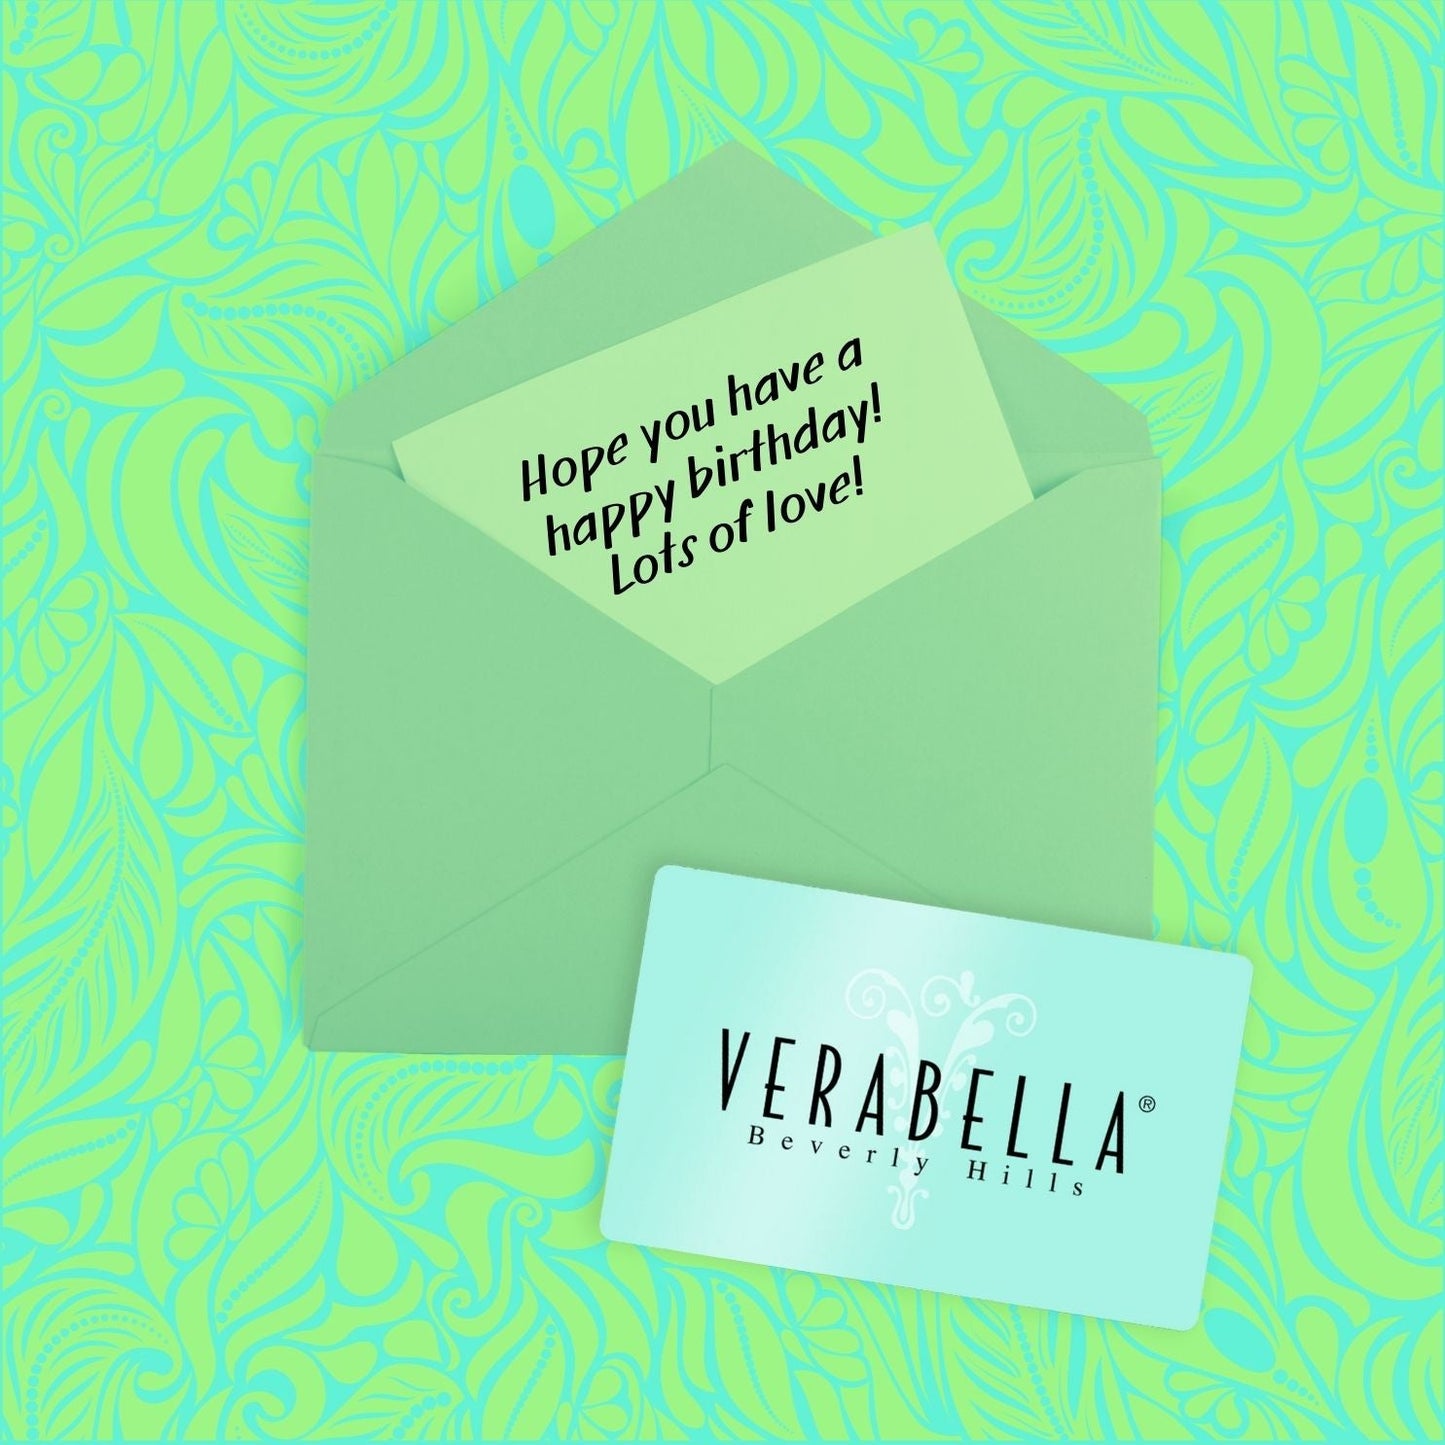 VERABELLA gift card is great for a birthday gift